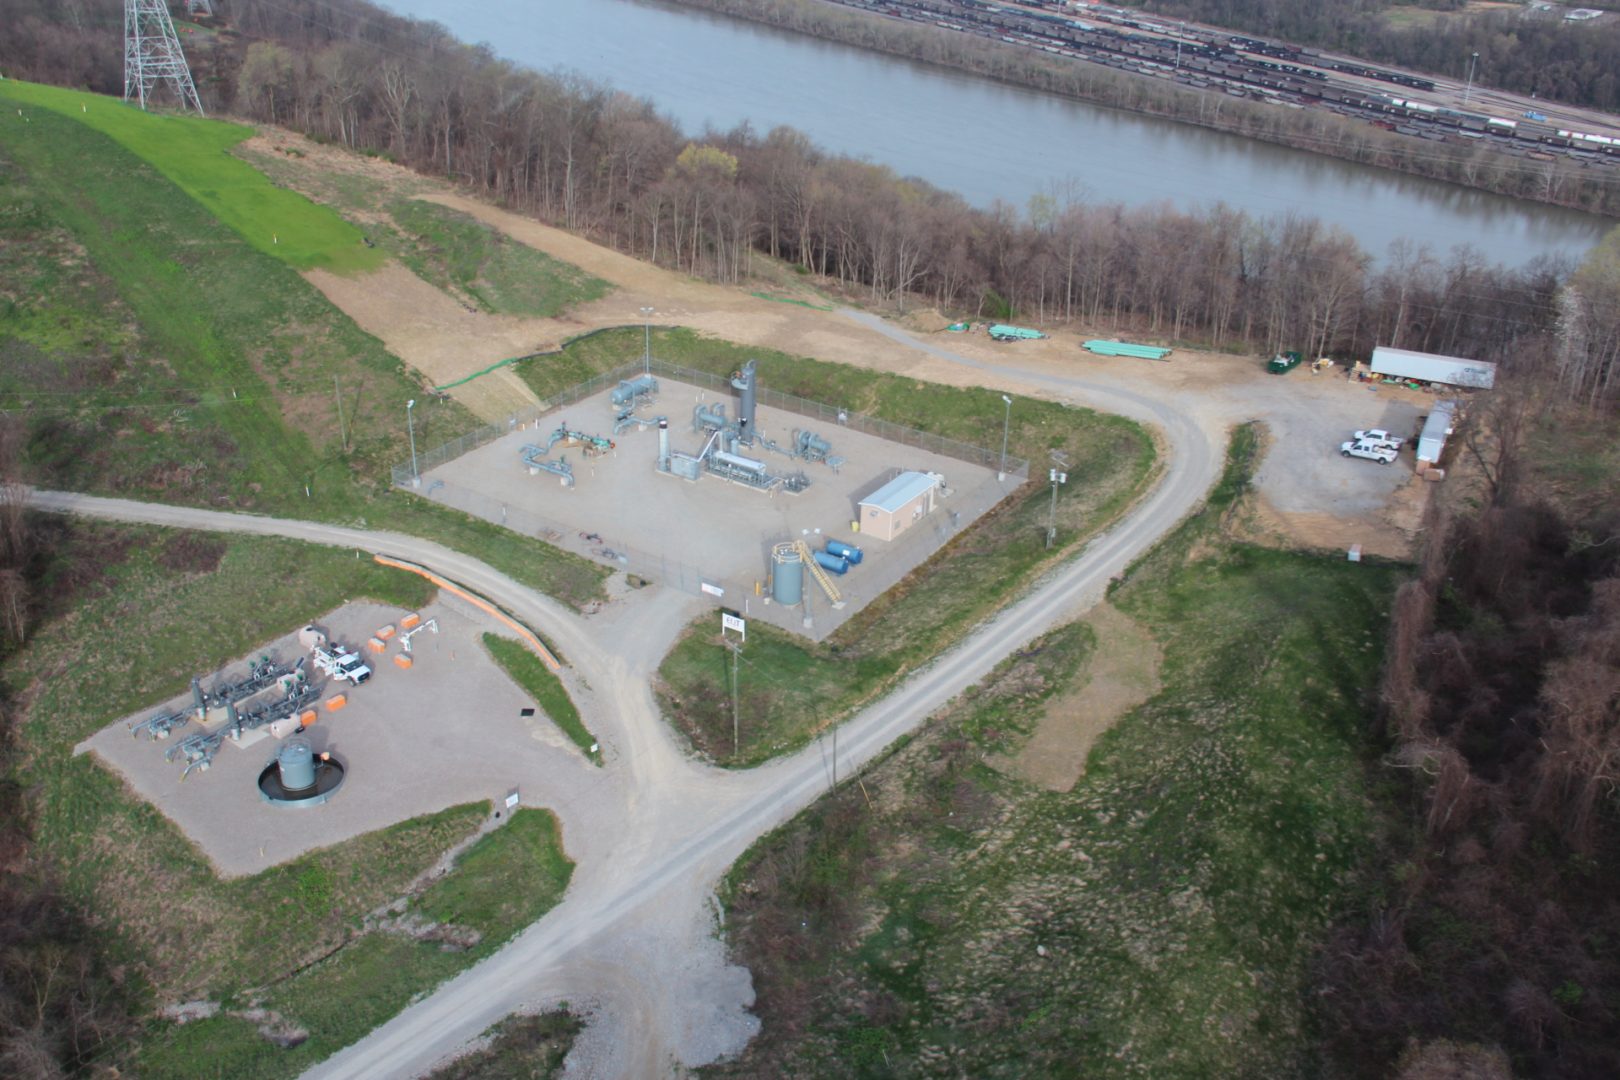 An oil and gas well in Forward Township, Allegheny County. Photo: Reid R. Frazier